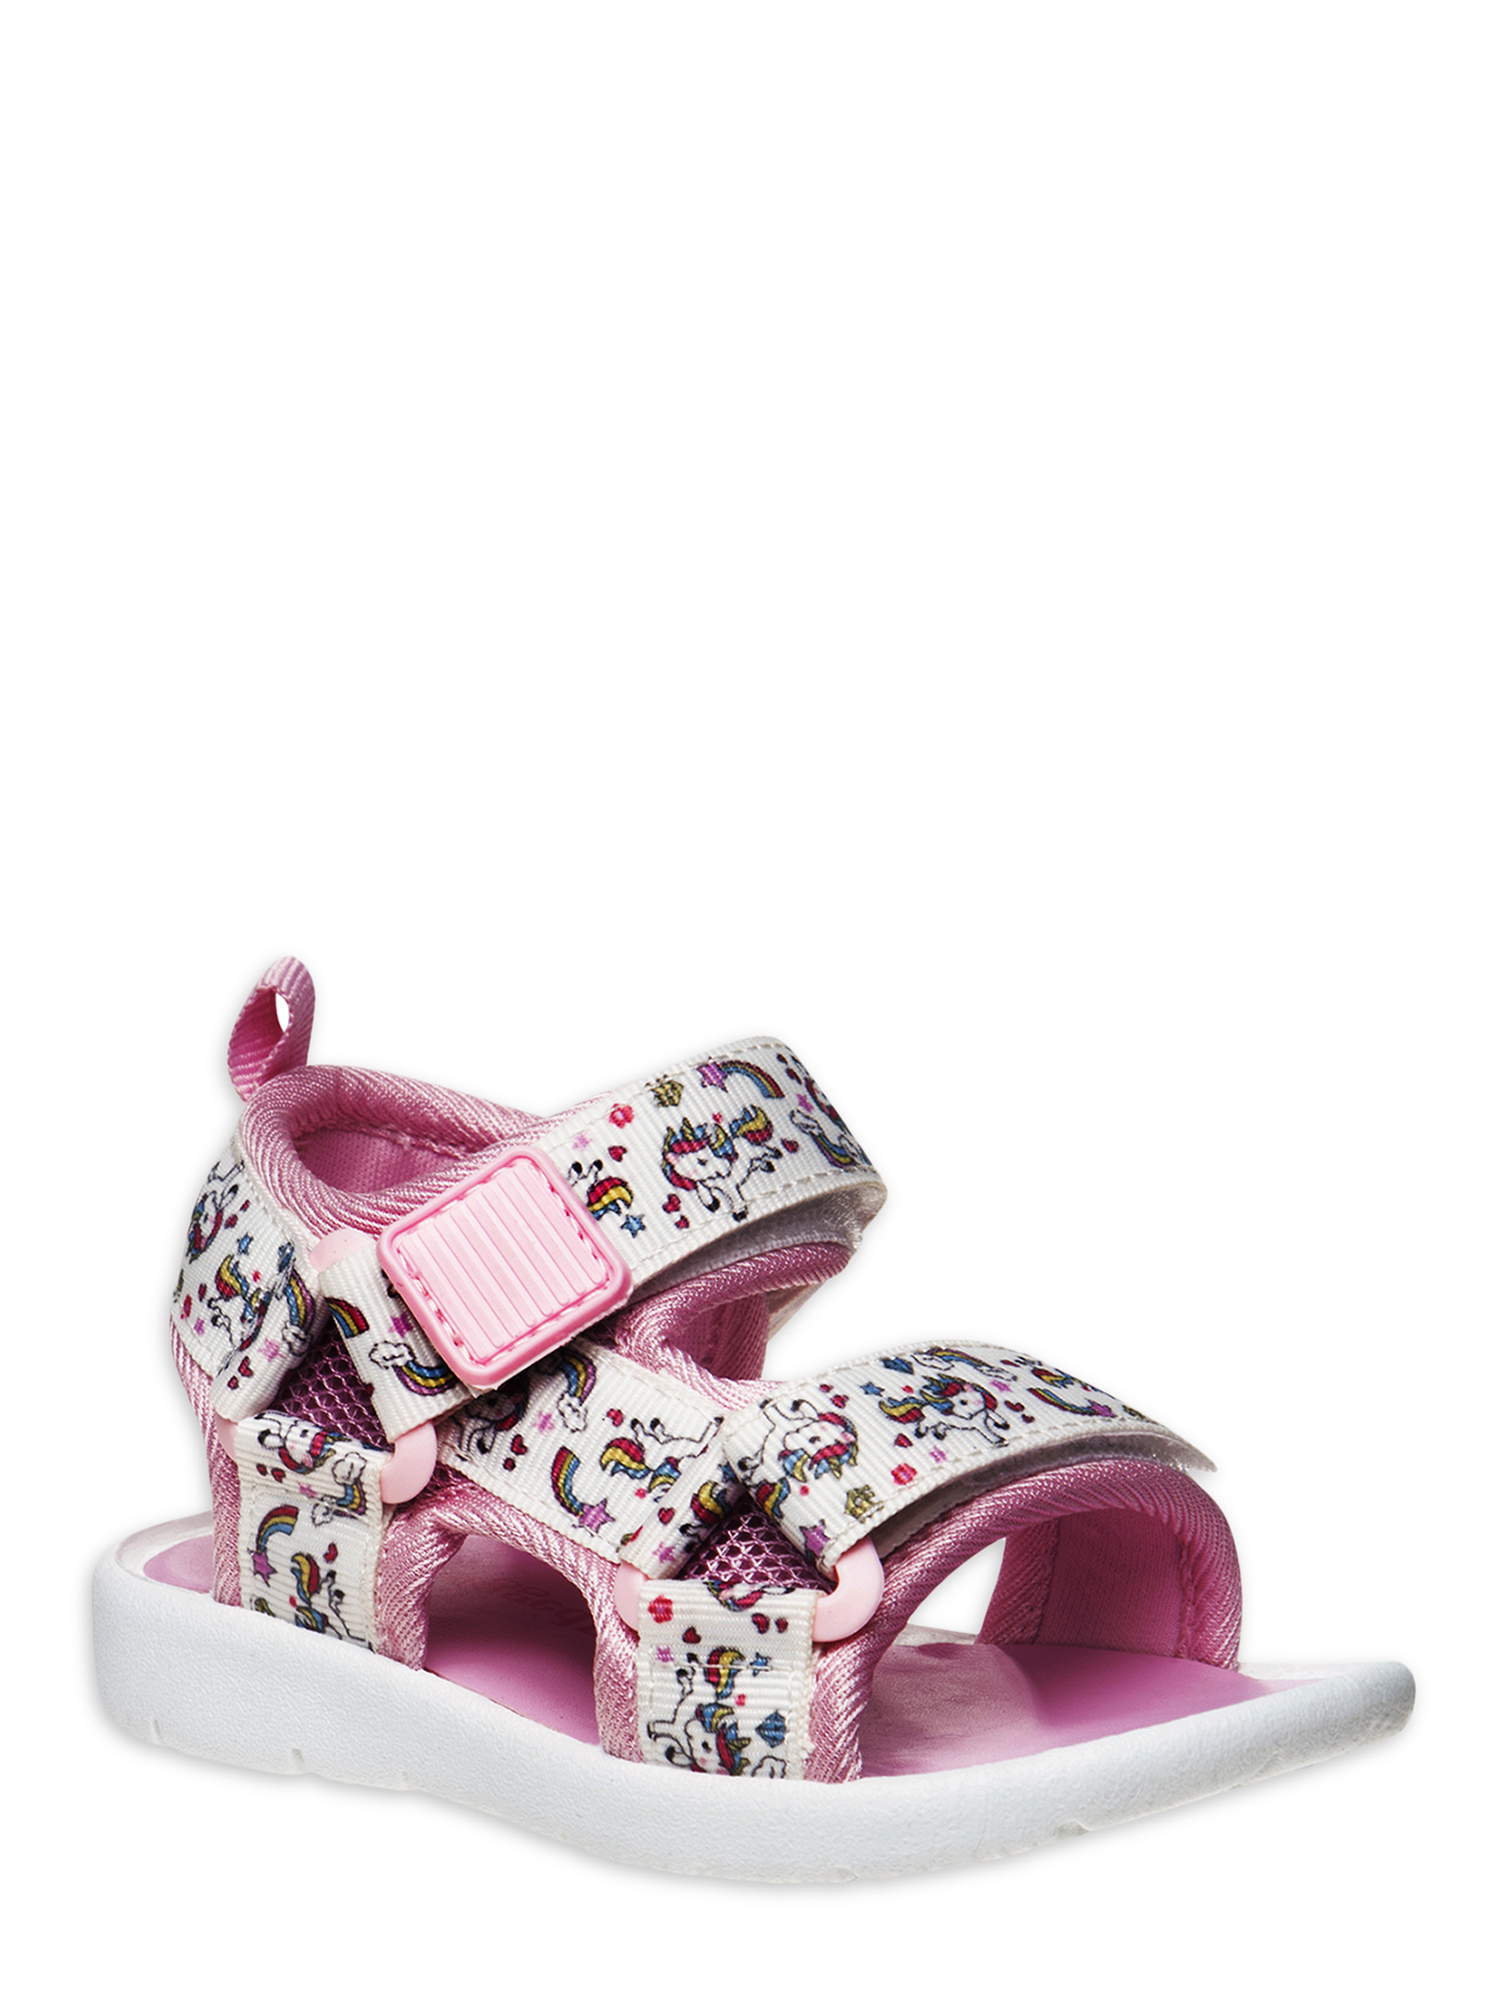 Rugged Bear Unicorn & Rainbows Two Strap Athletic Sandals (Toddler Girls) - image 1 of 5